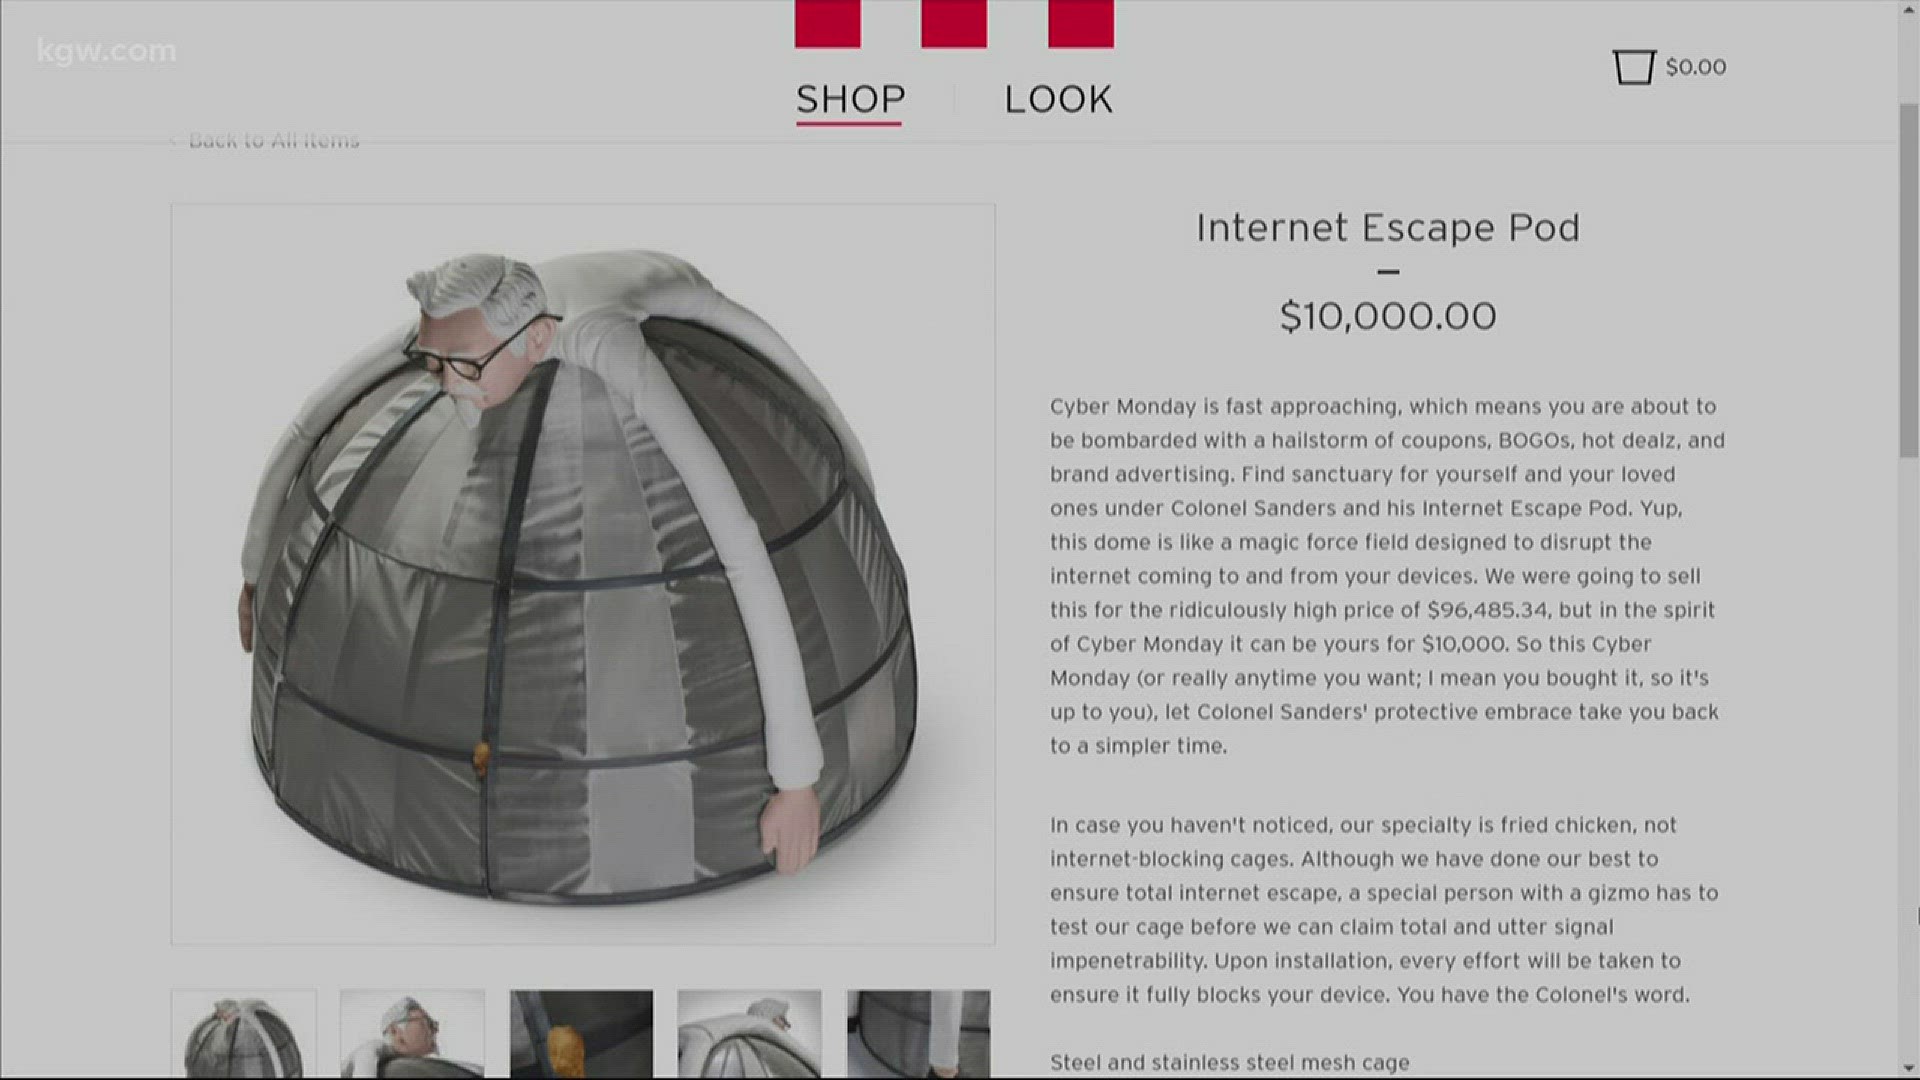 Internet Escape Pod and flying cars?